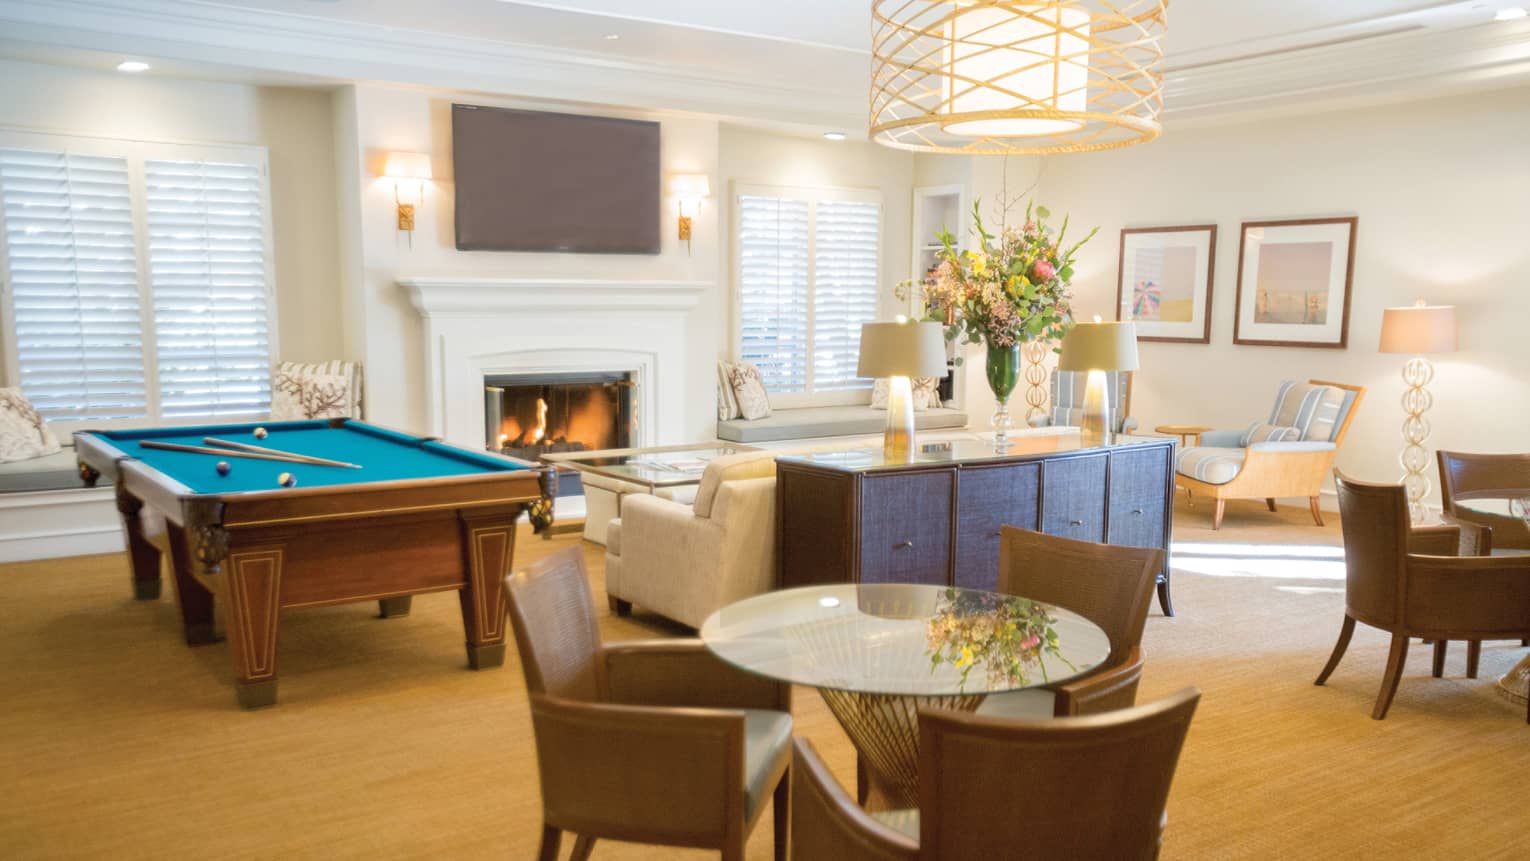 Hotel recreation lounge with pool table, fireplace and sofa, round glass tables with chairs 